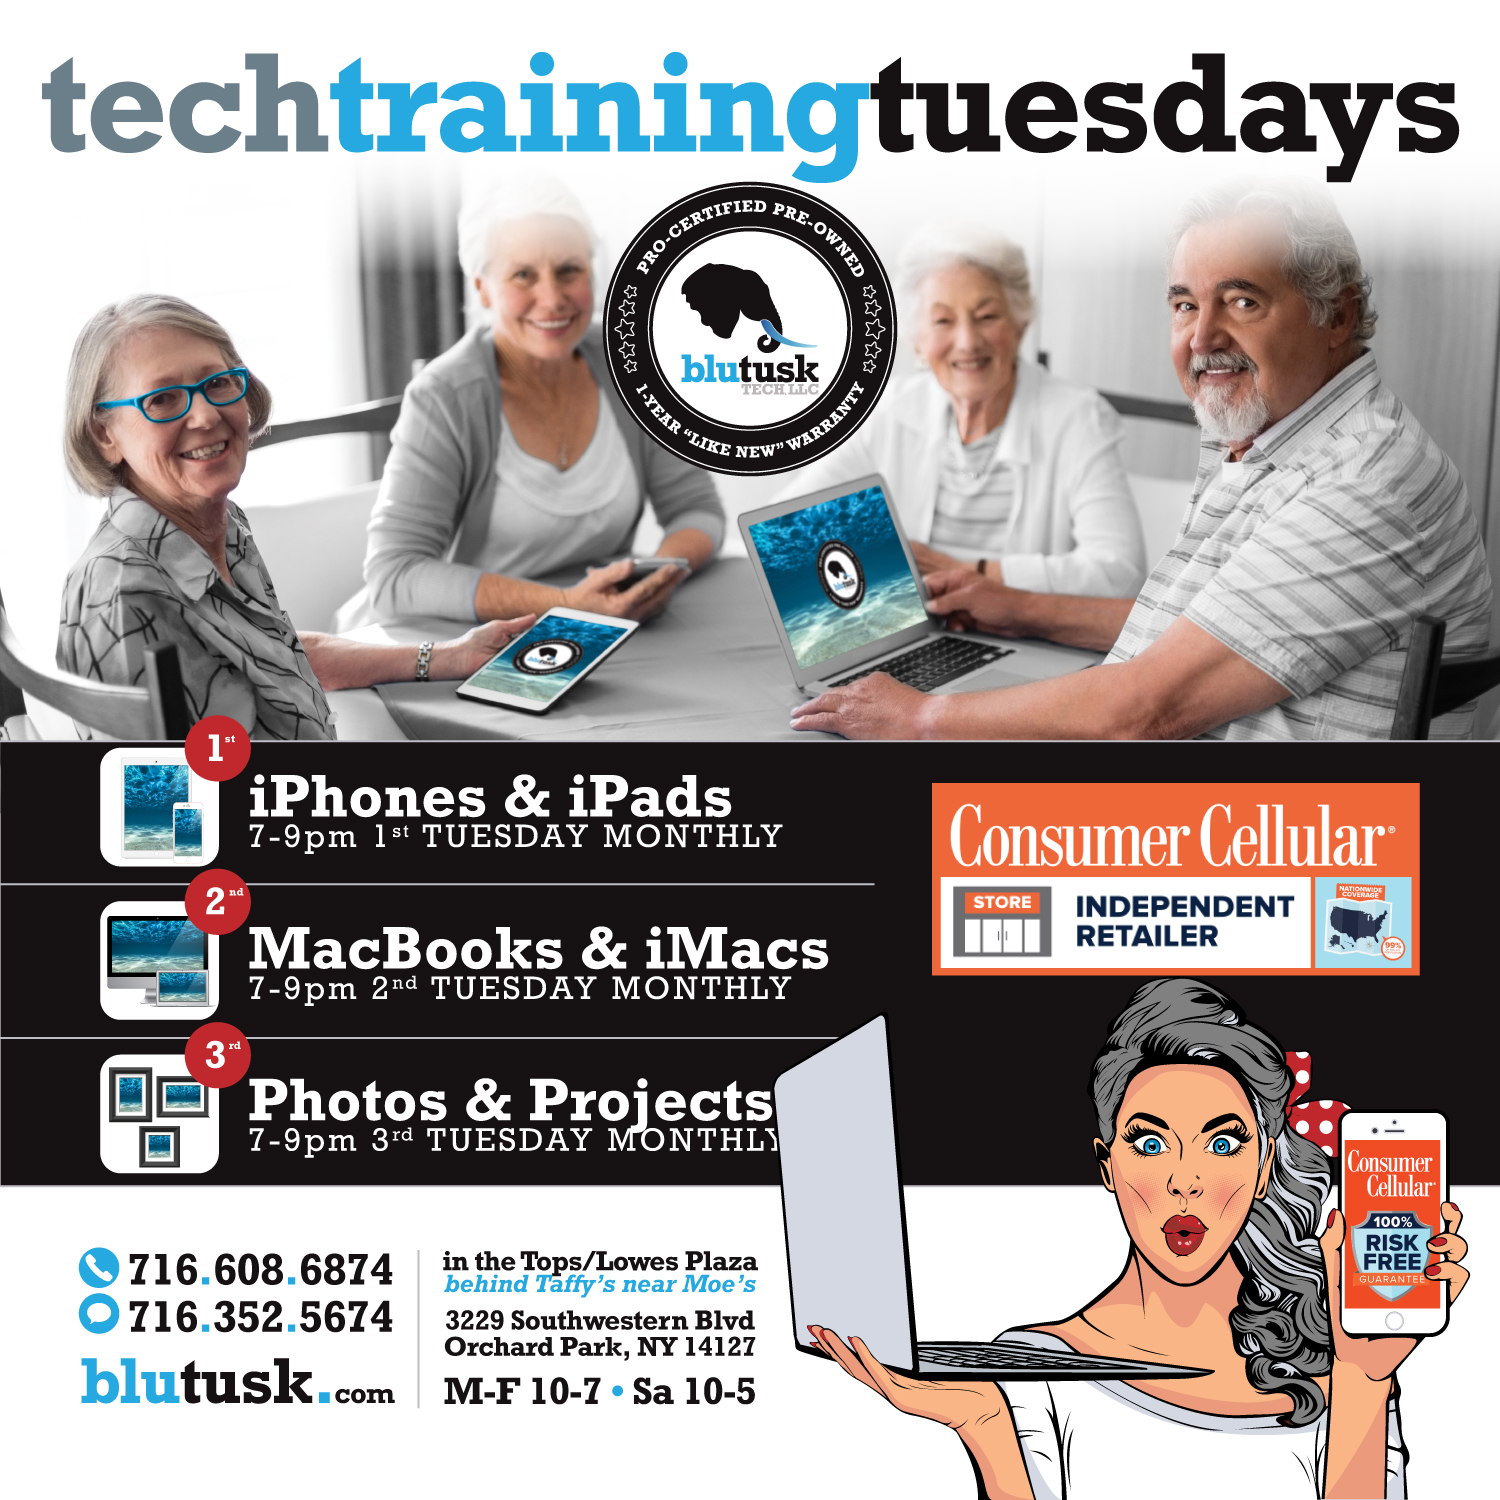 Number 3, Tech Training Tuesdays, from the top 10 reasons to shop with The Pre-Owned Pros at Blutusk Tech, LLC 